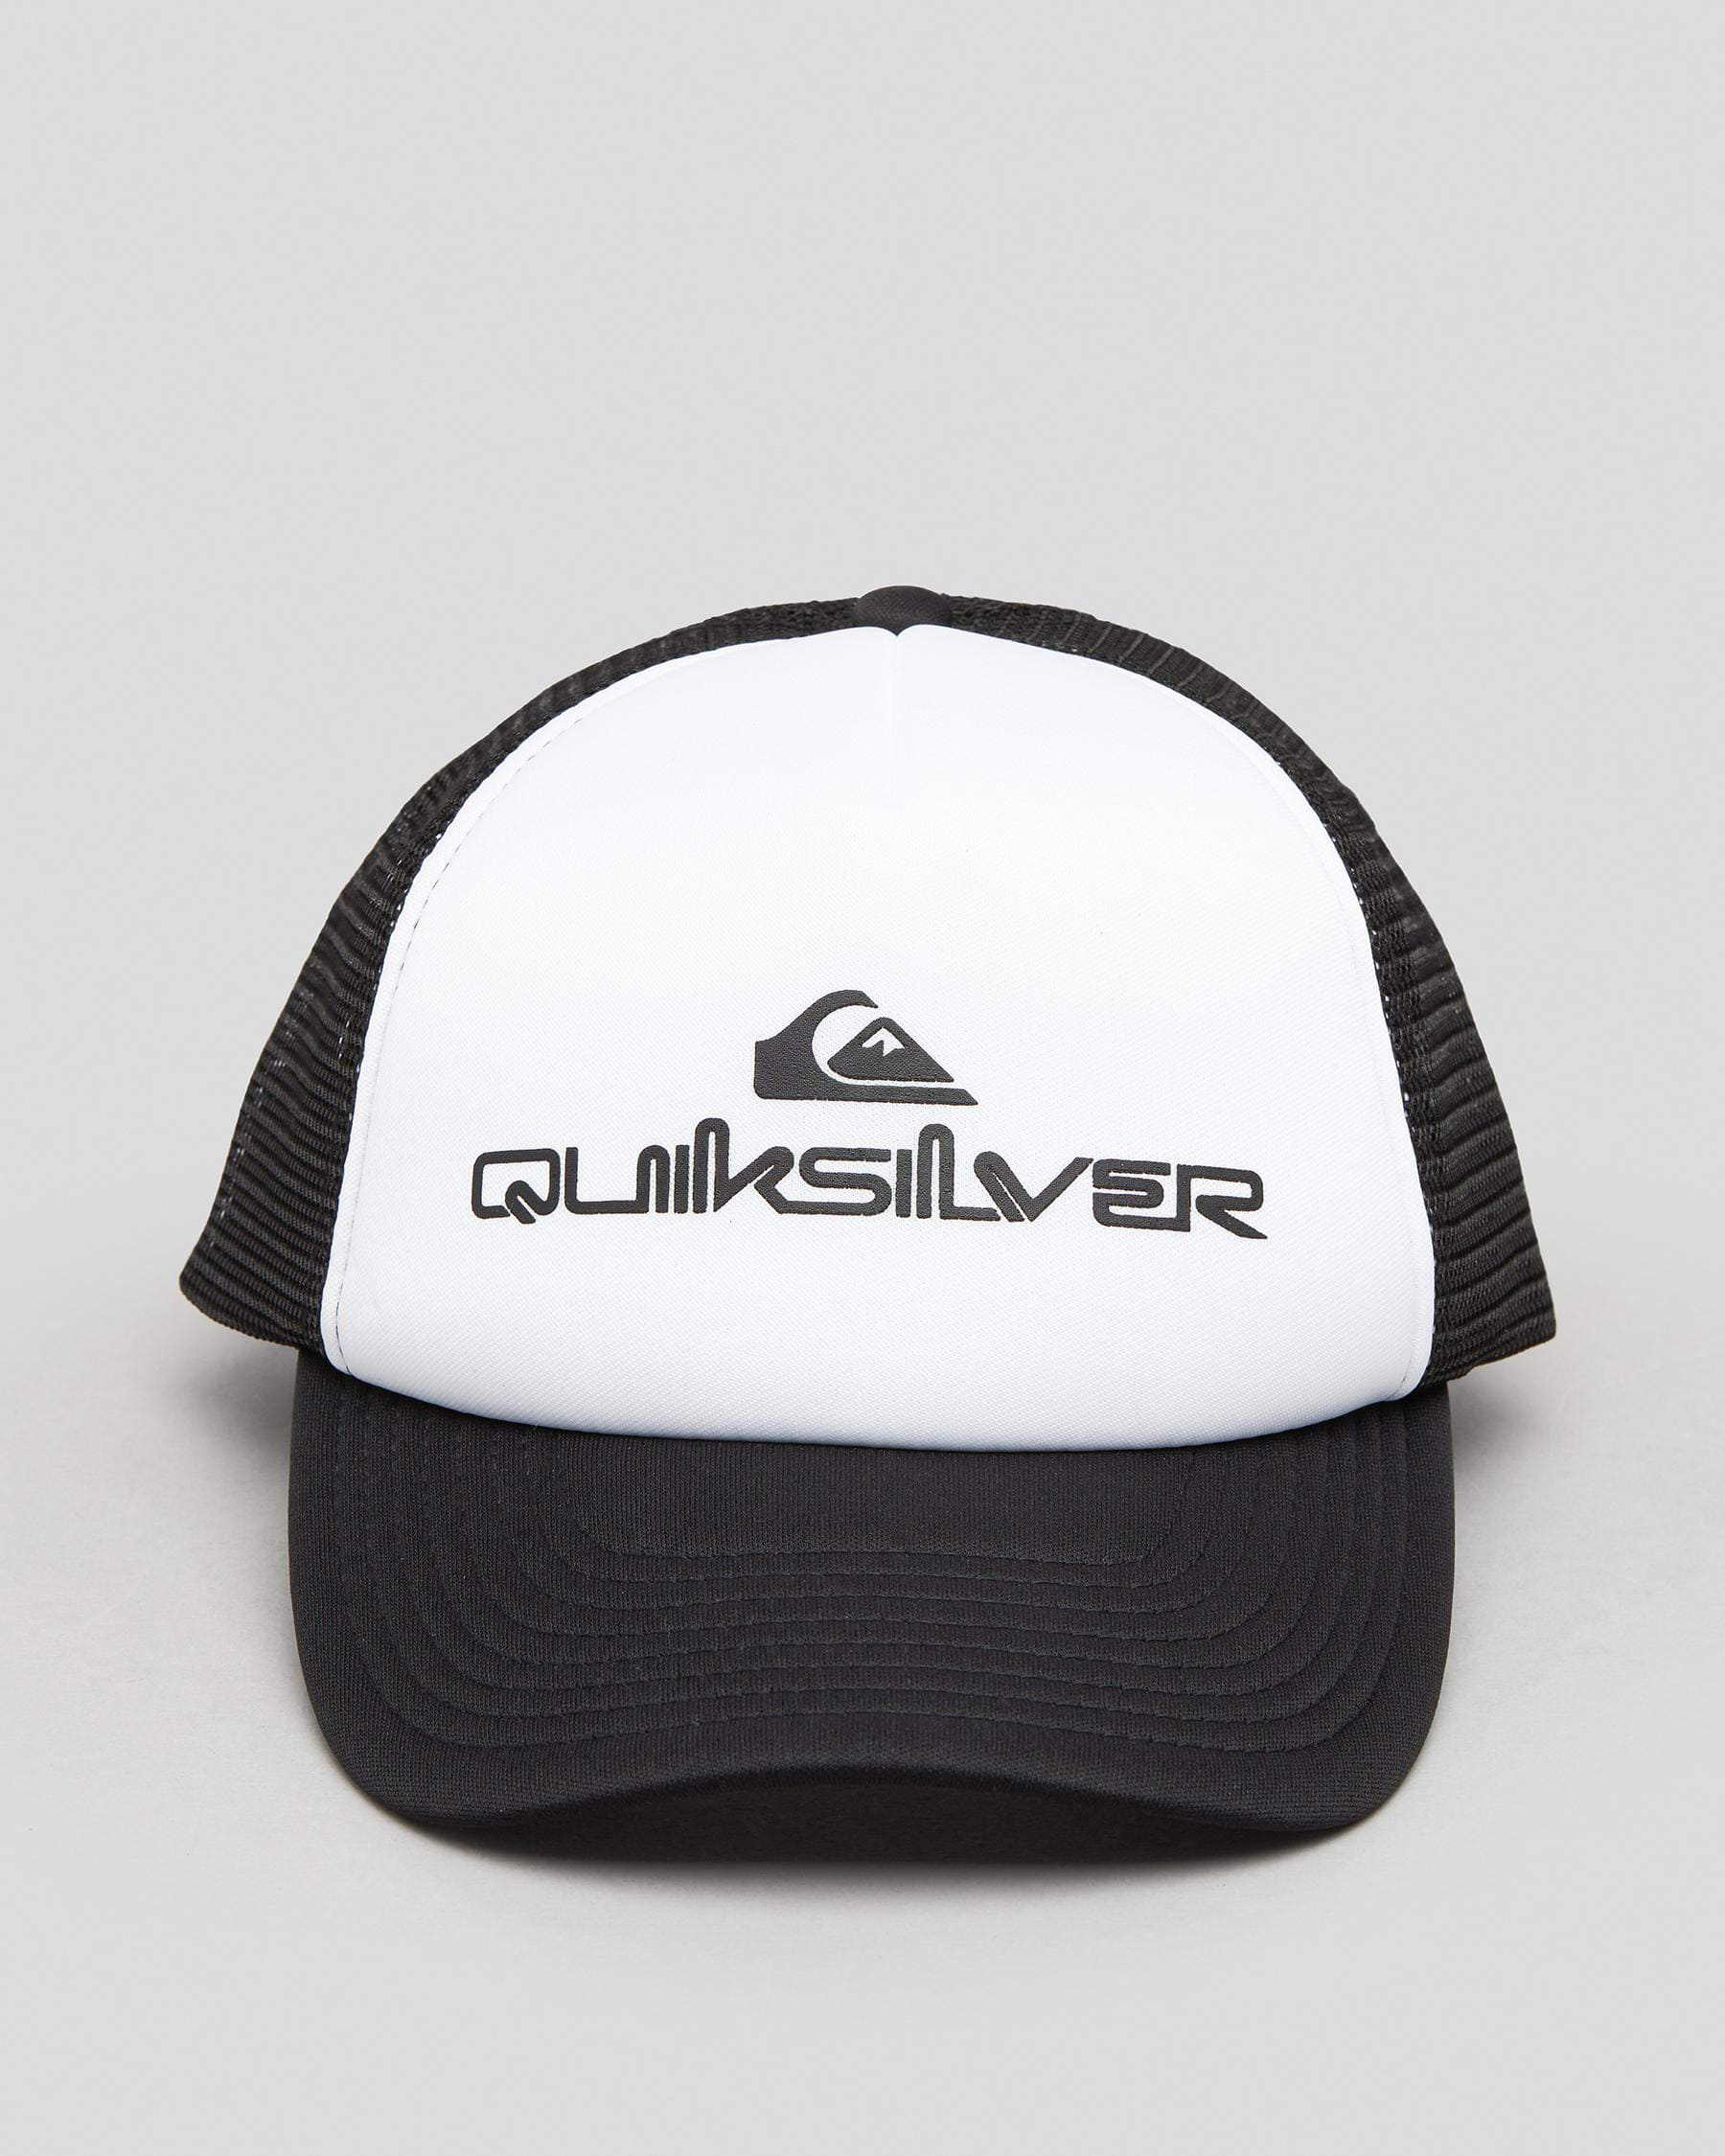 & Cap Easy Trucker White Beach - In Quiksilver - Omnistack FREE* Returns States City United Shipping